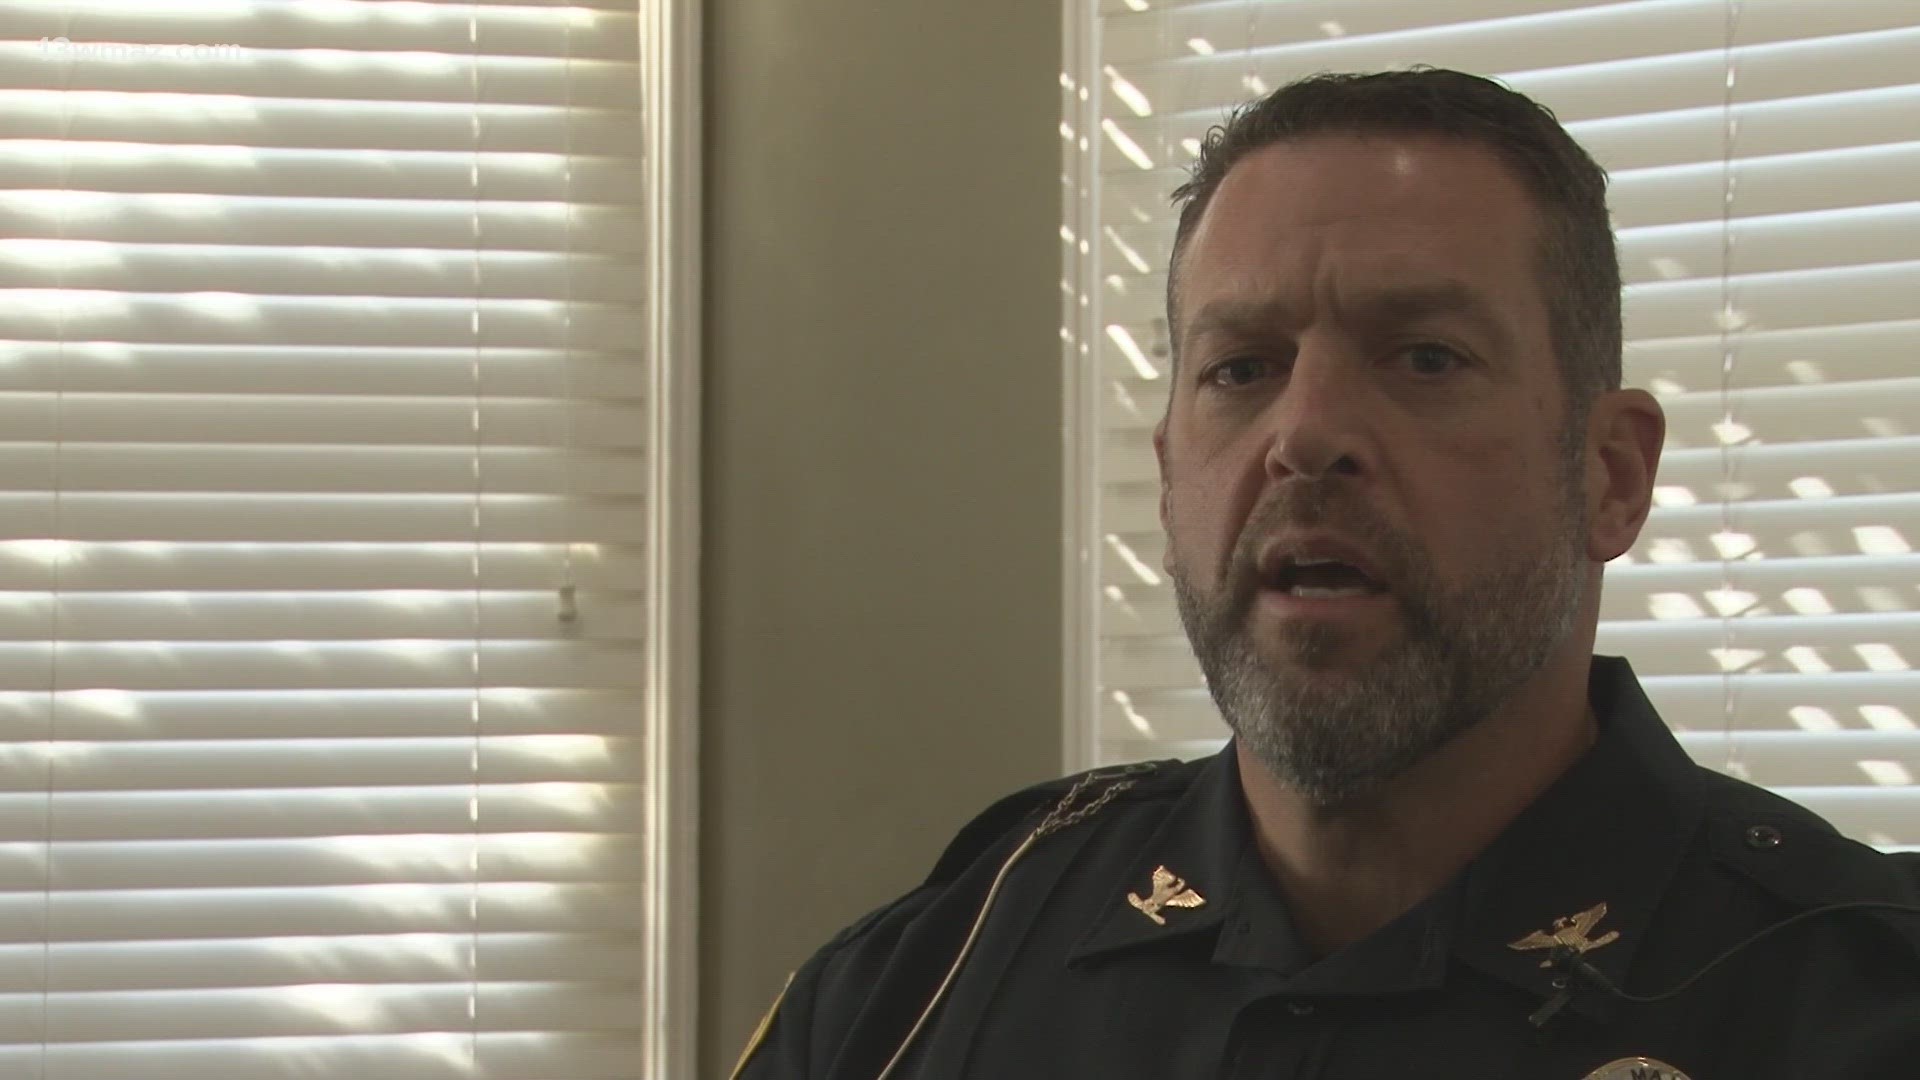 Chief Wesley Hardin has 29 years in law enforcement and has found passion in campus security